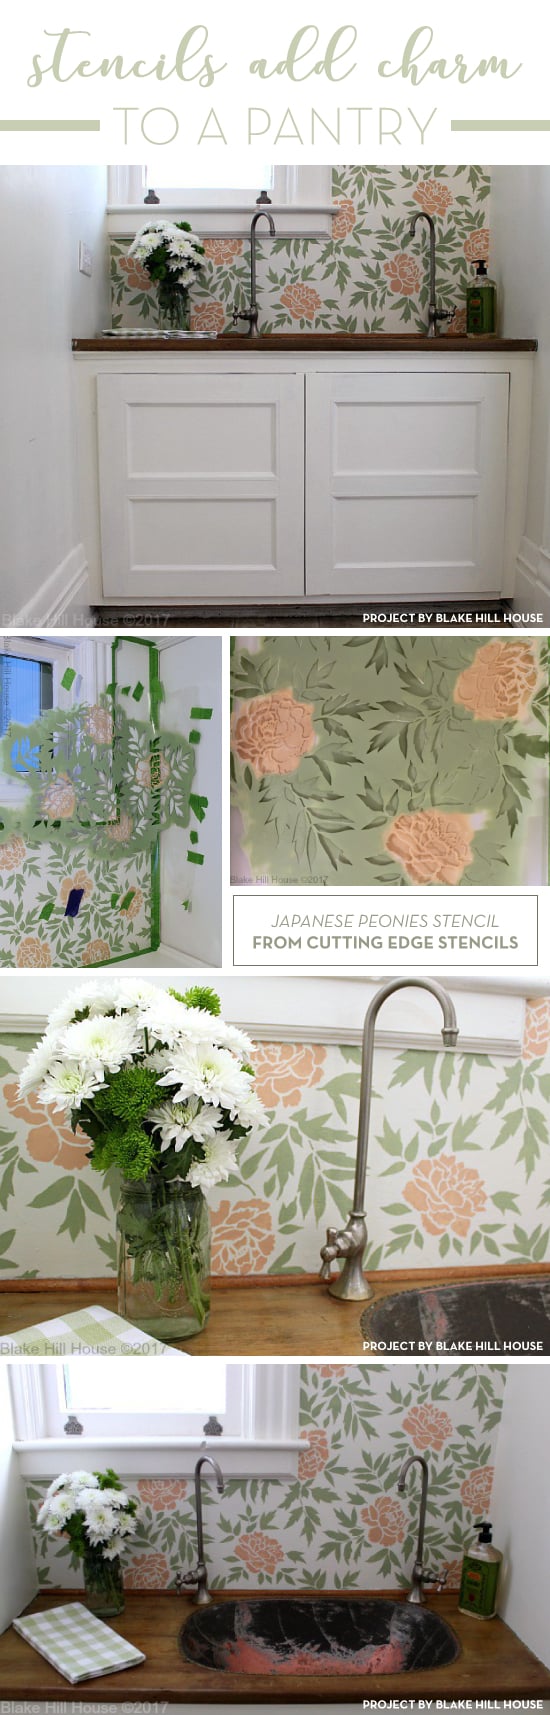 Cutting Edge Stencils shares a DIY floral stenciled accent wall in a pantry using the Japanese Peonies Allover Stencil. http://www.cuttingedgestencils.com/japanese-peonies-floral-stencil-pattern.html